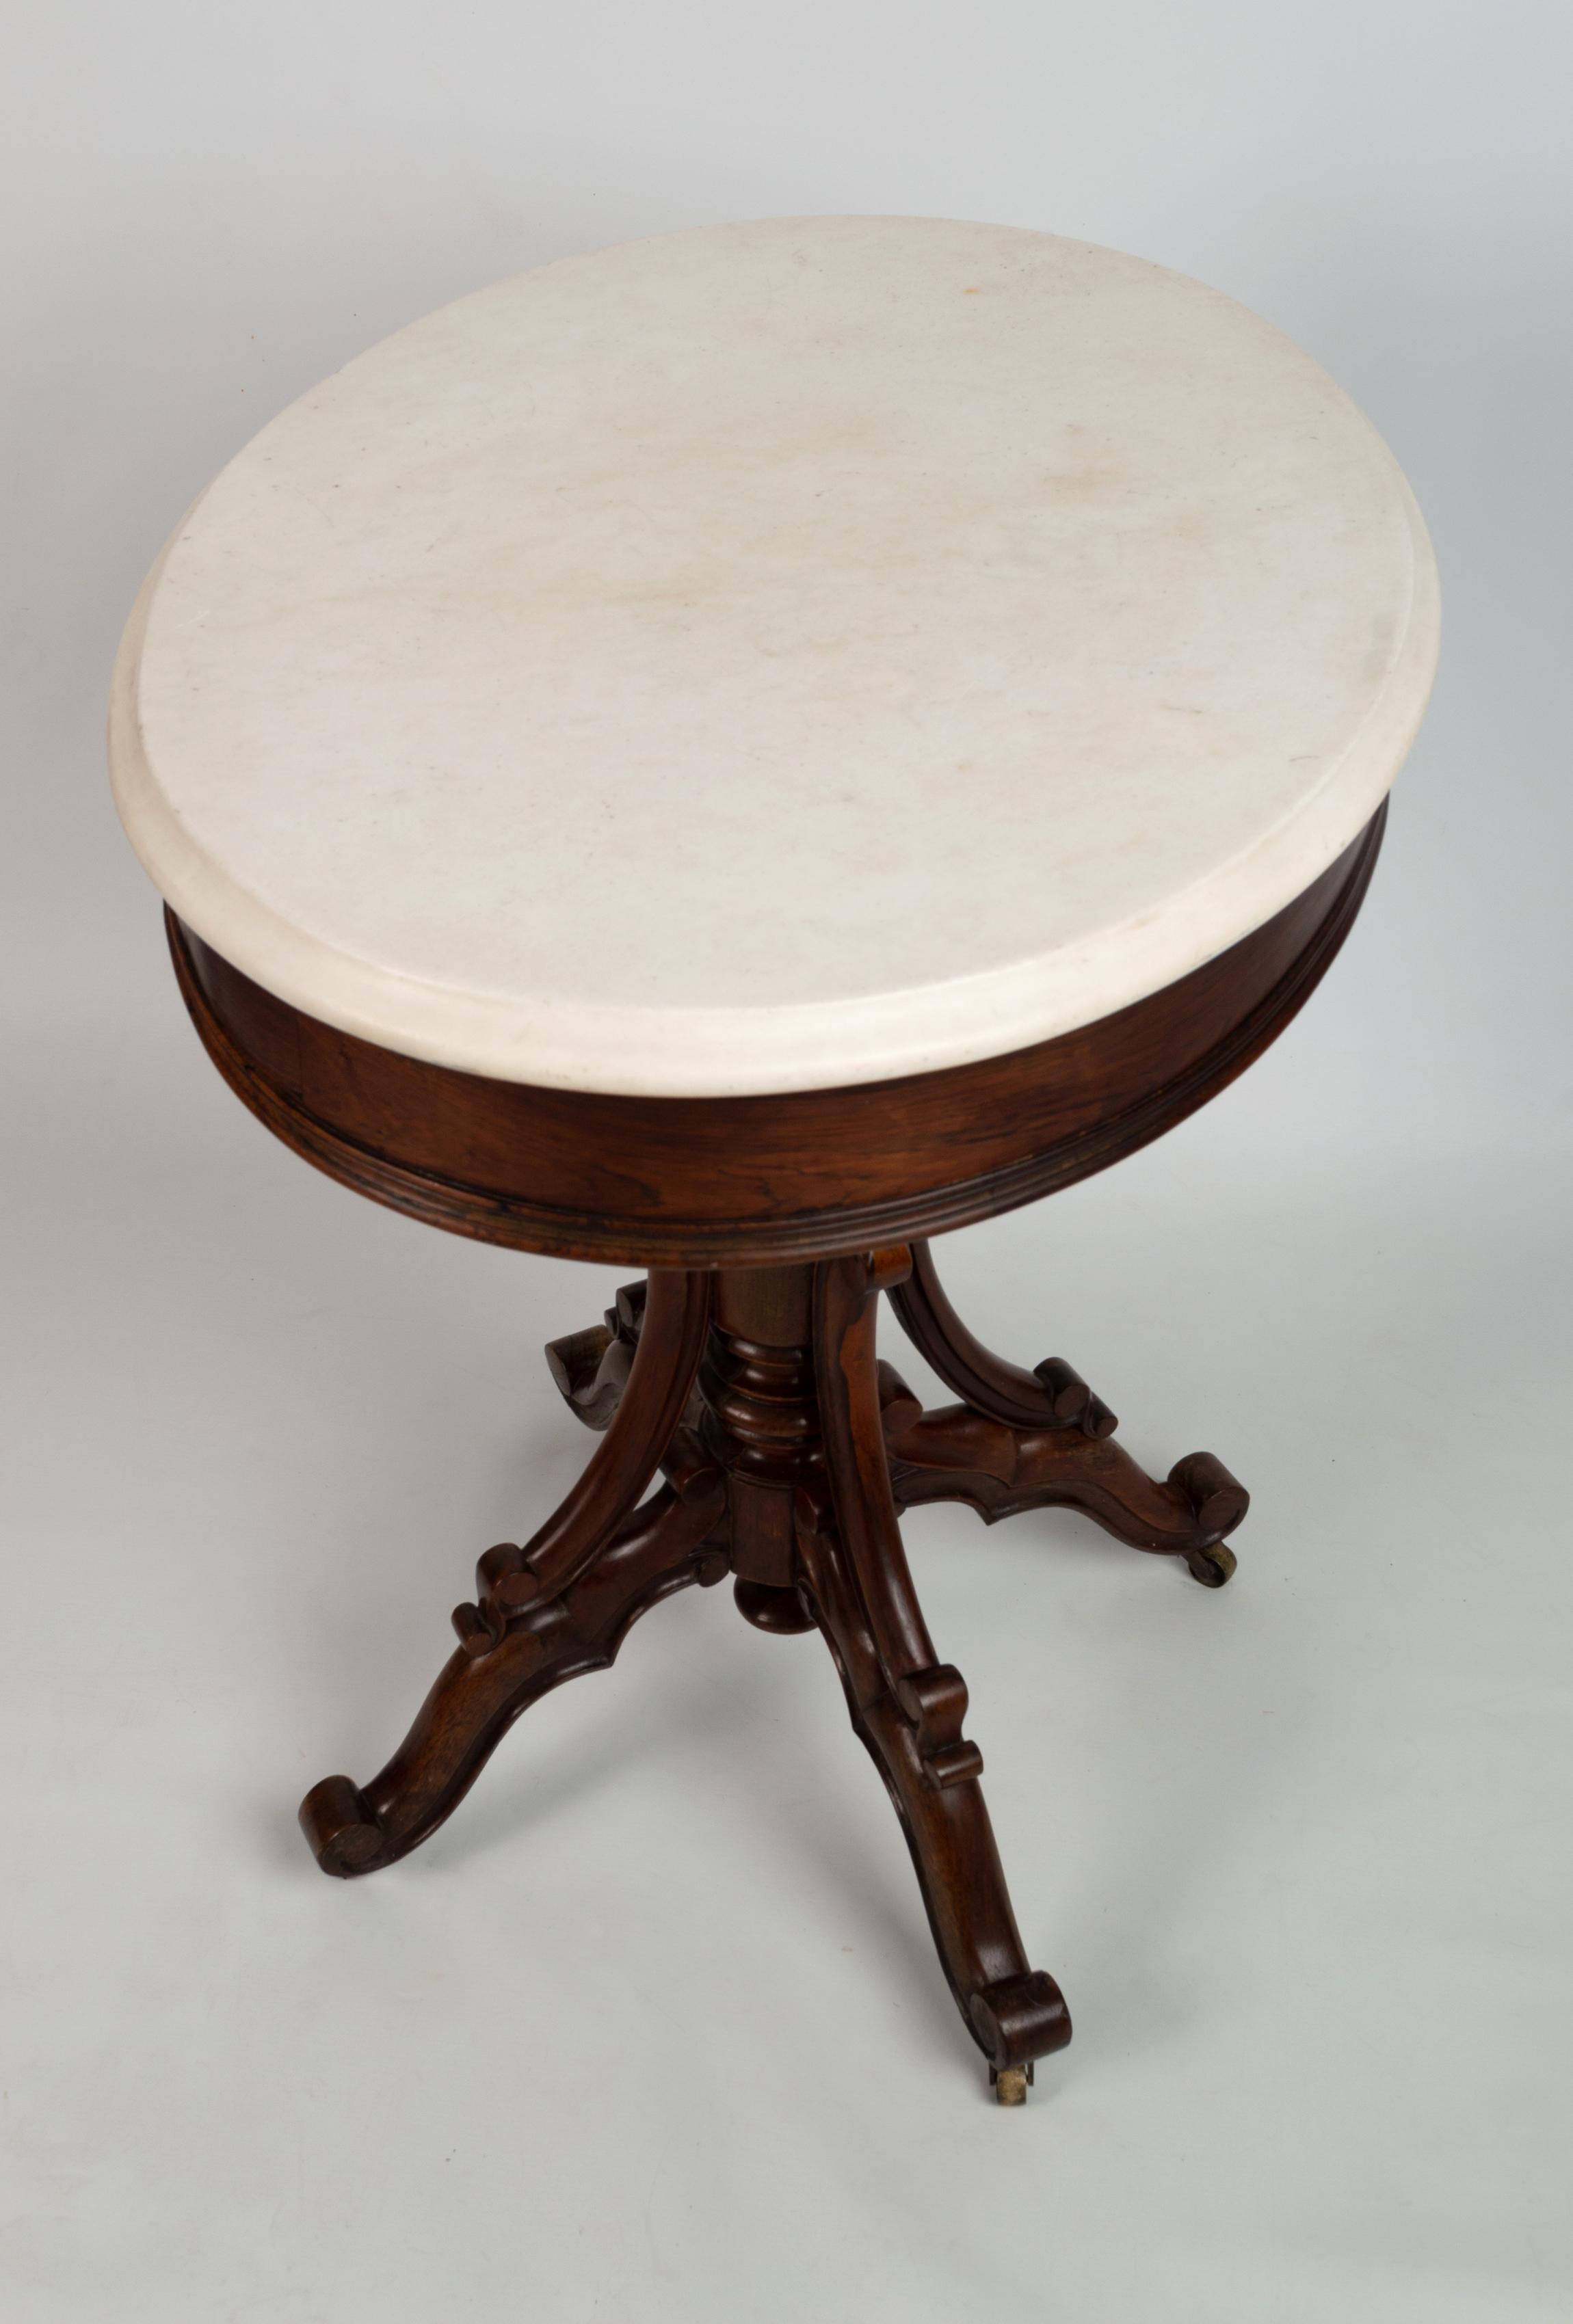 Antique French 19th Century Rosewood and Marble Oval Occasional Table C1850 For Sale 3